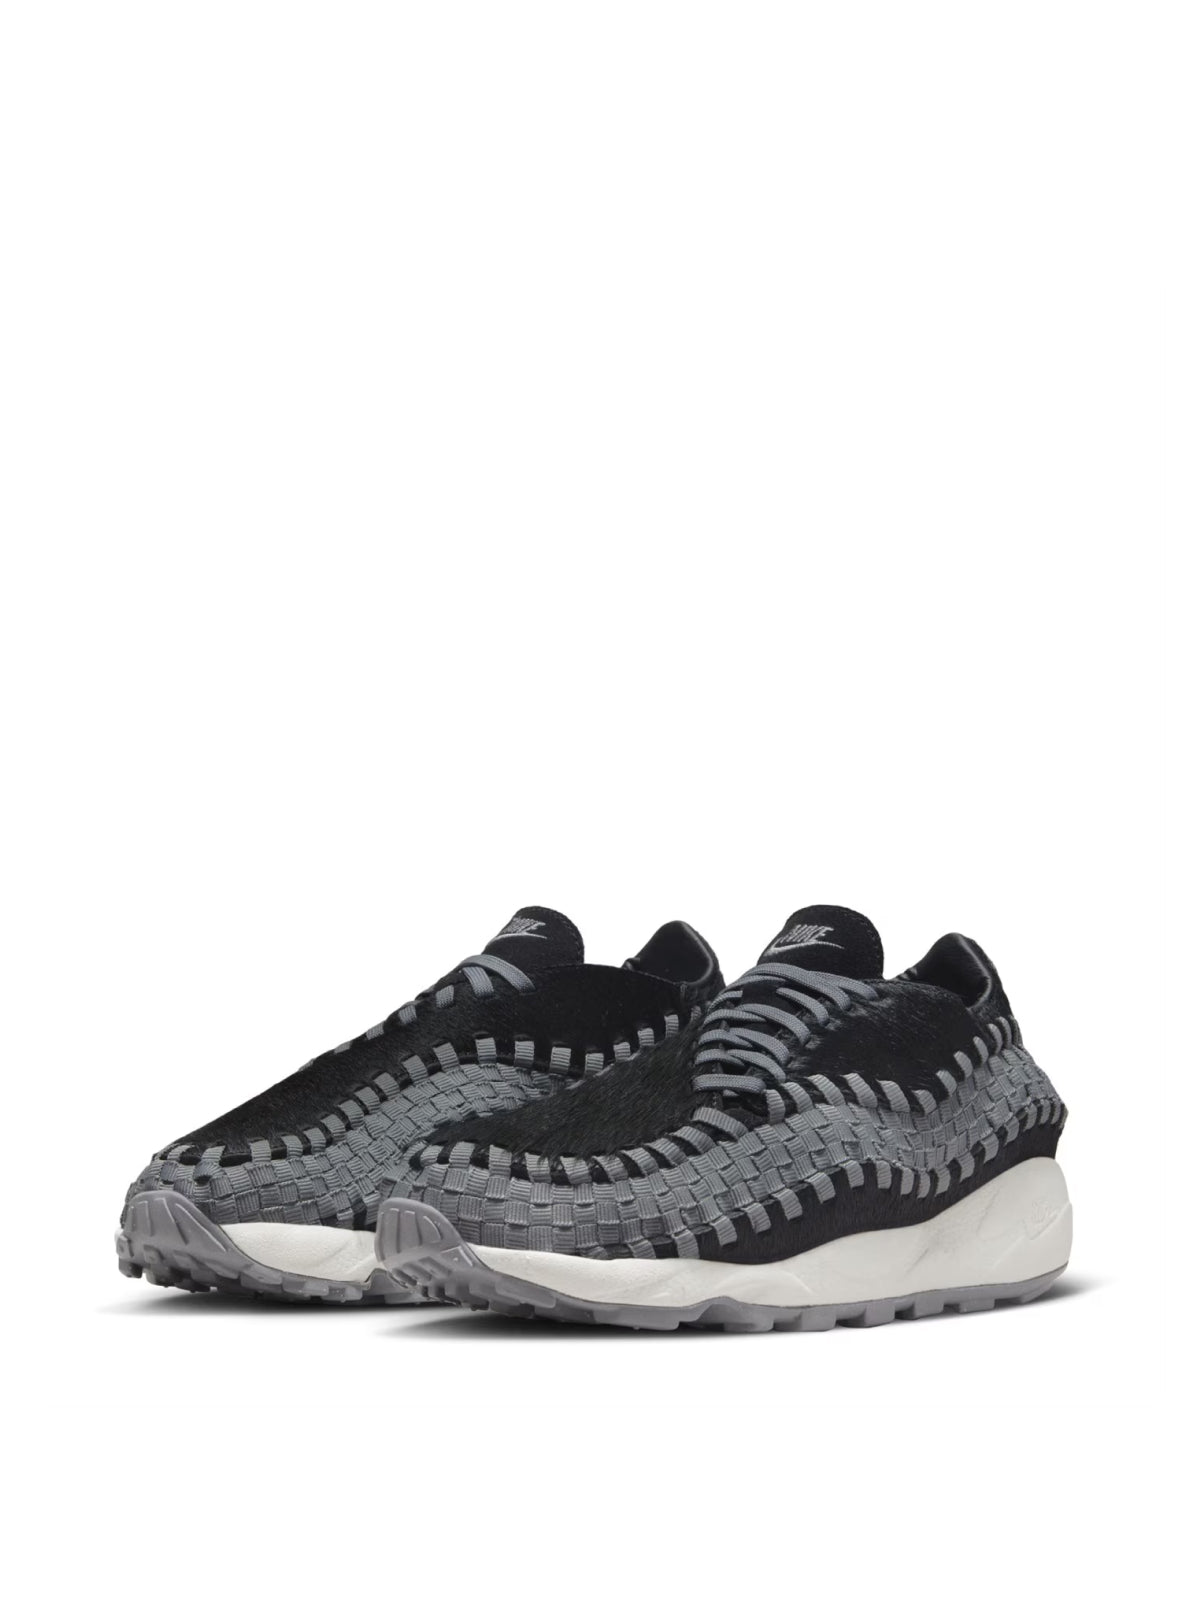 Nike-OUTLET-SALE-Air Footscape Sneakers-ARCHIVIST